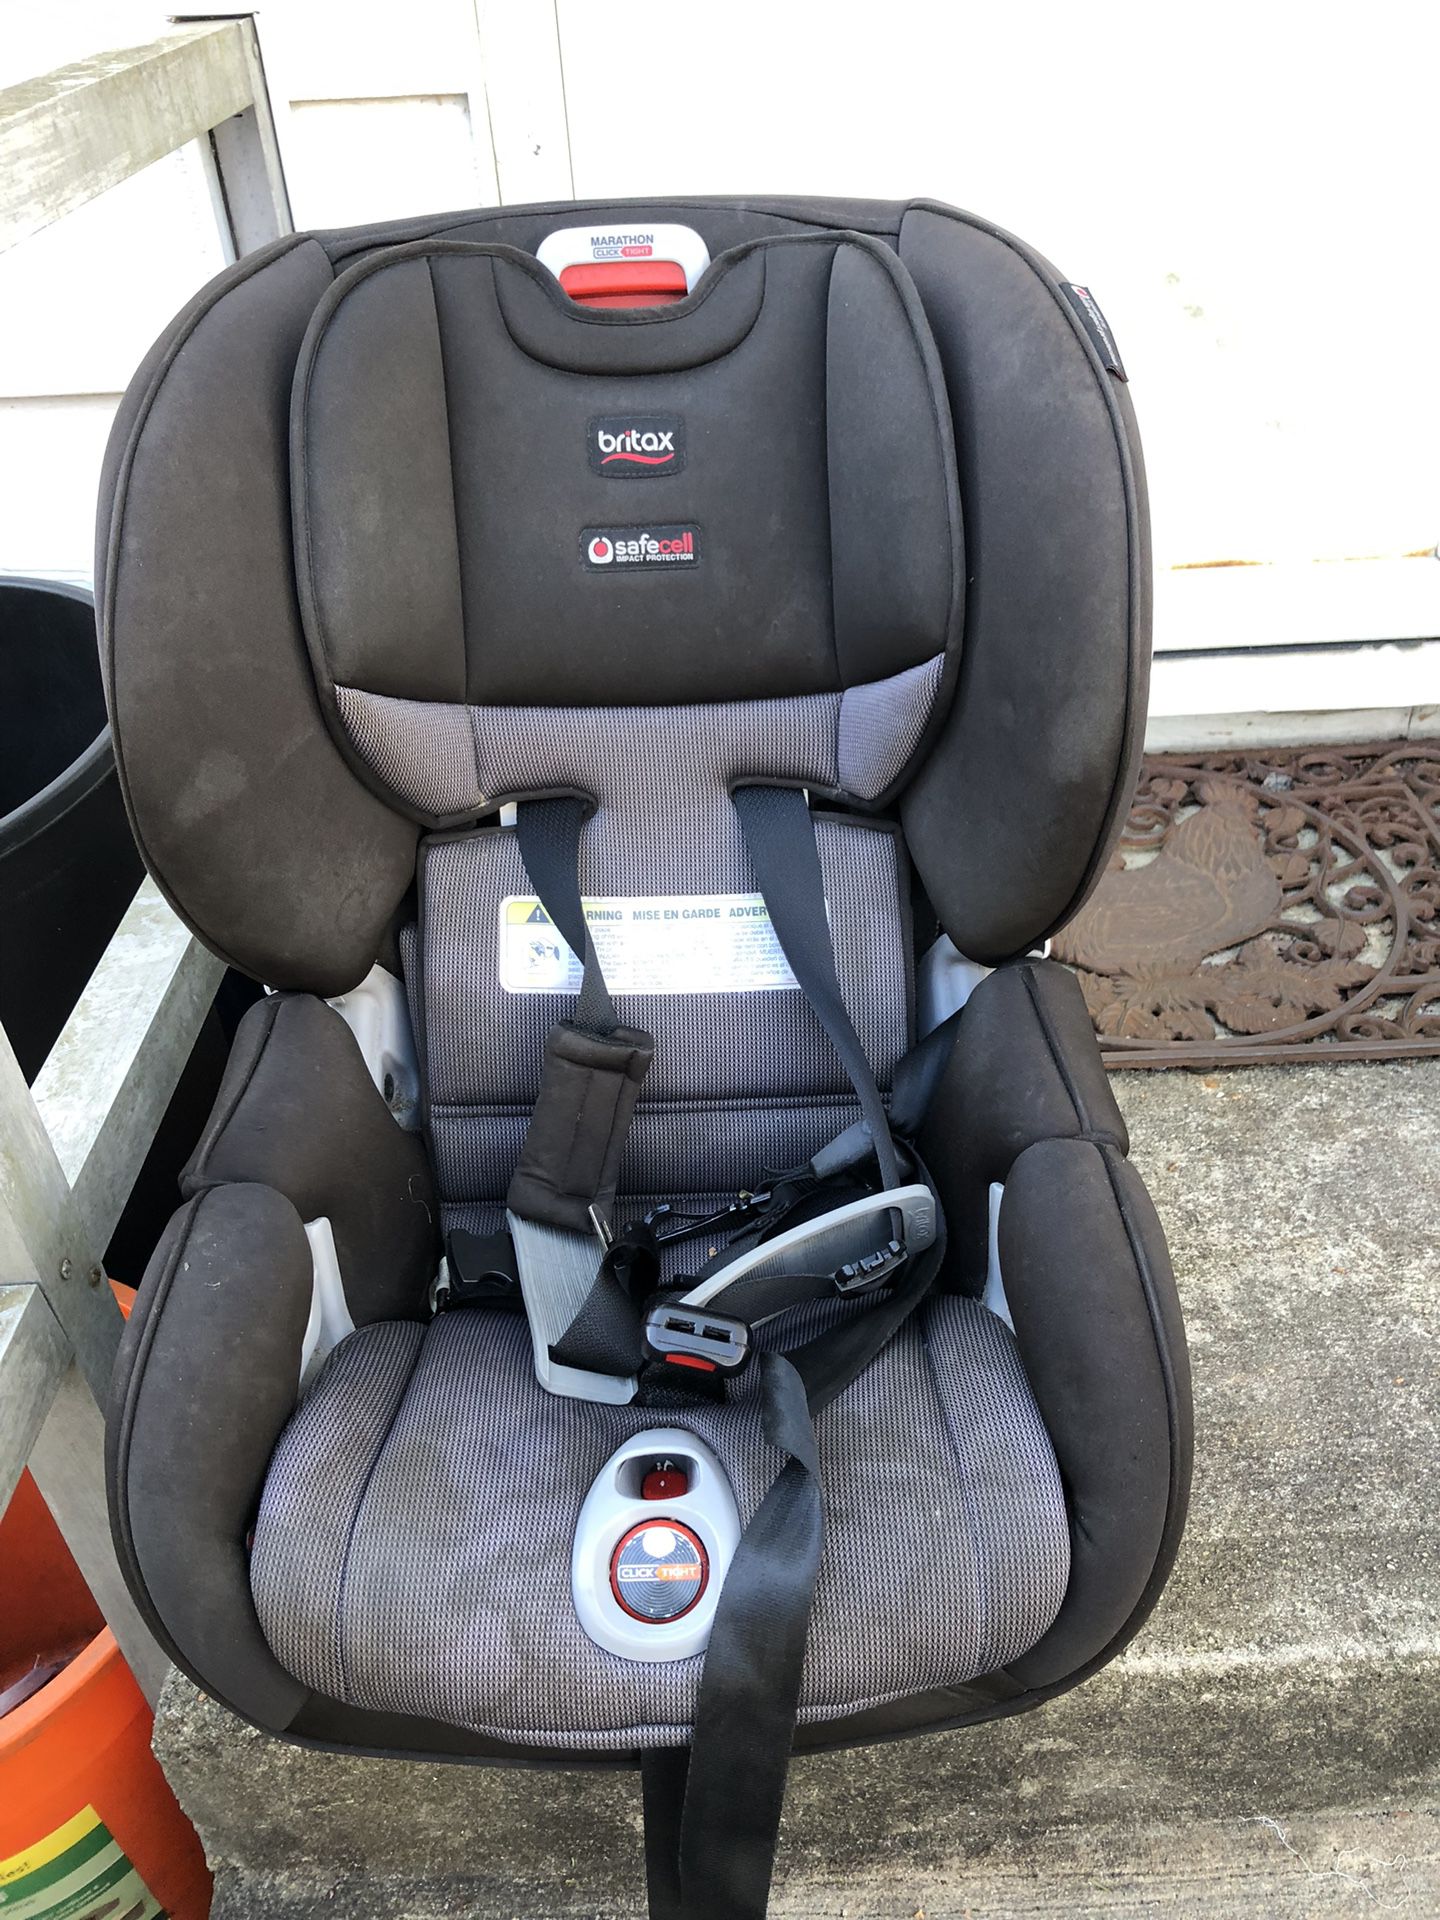 BRITAX The VERY BEST Car Seat You Can Buy. They Start At $300 To $1000